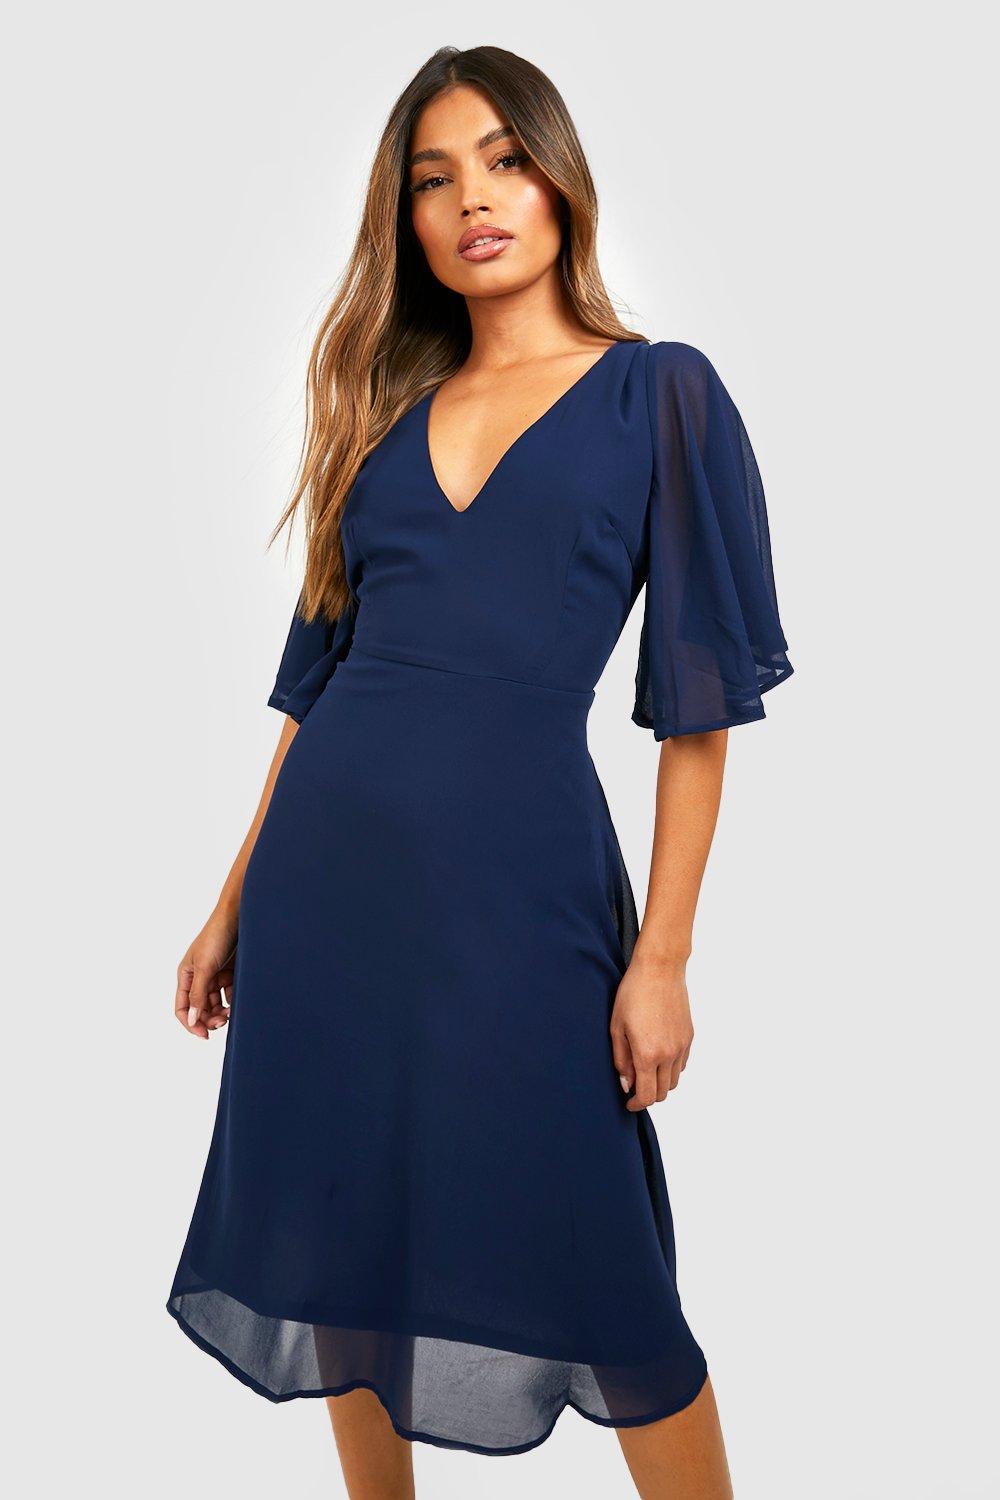 navy angel sleeve dress for Sale OFF 65%